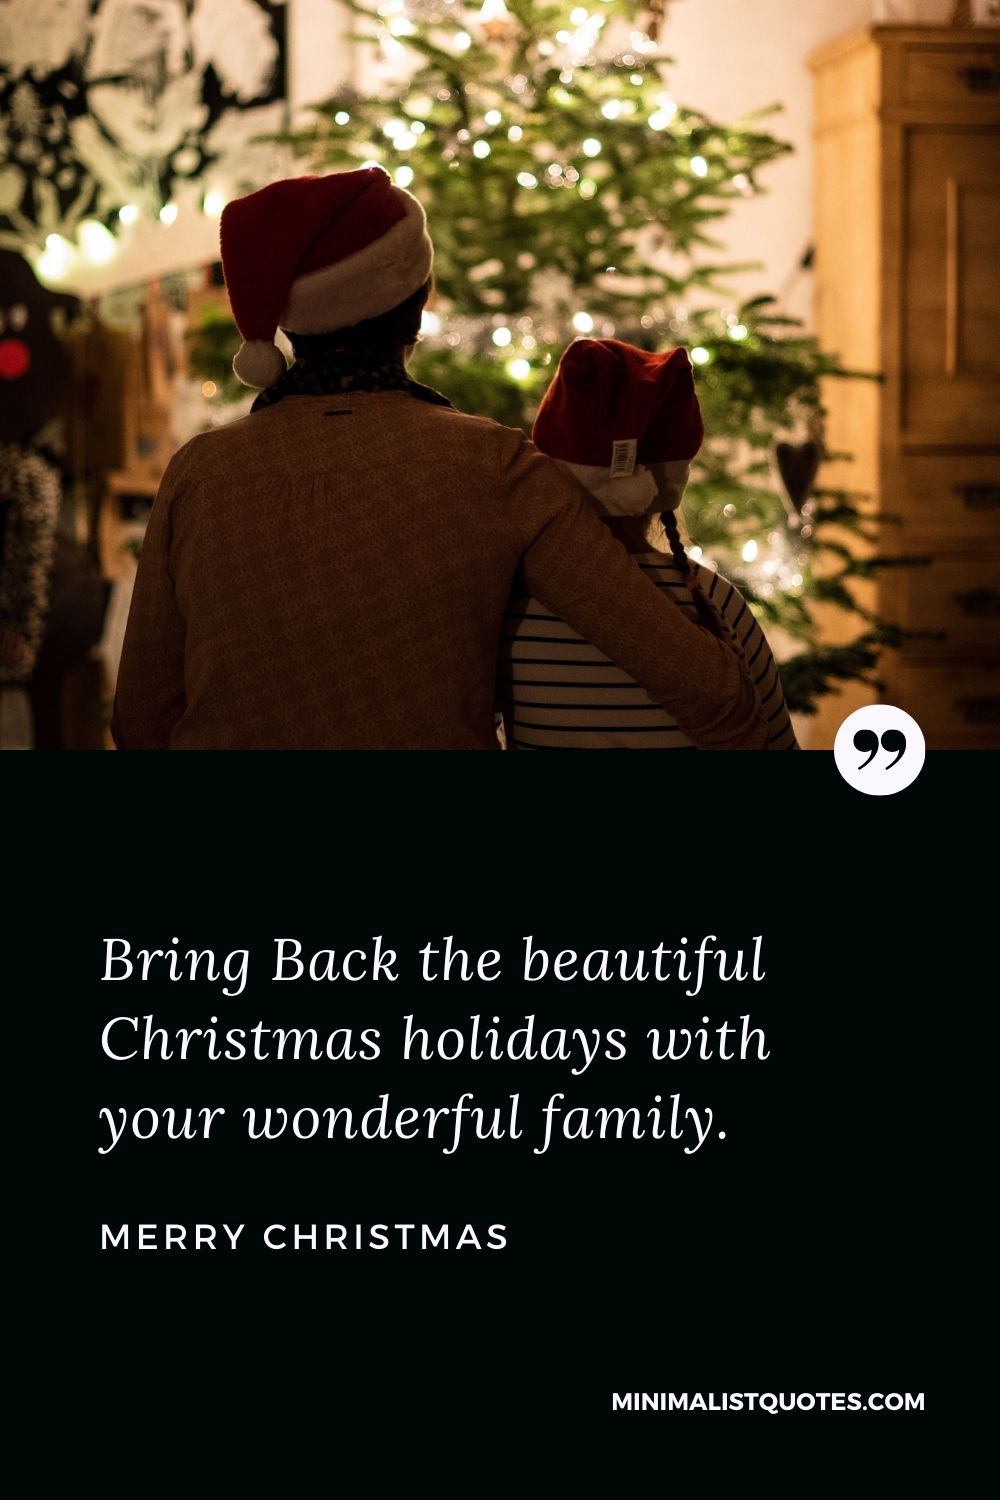 Merry Christmas Wish - Bring Back the beautiful Christmas holidays with your wonderful family.